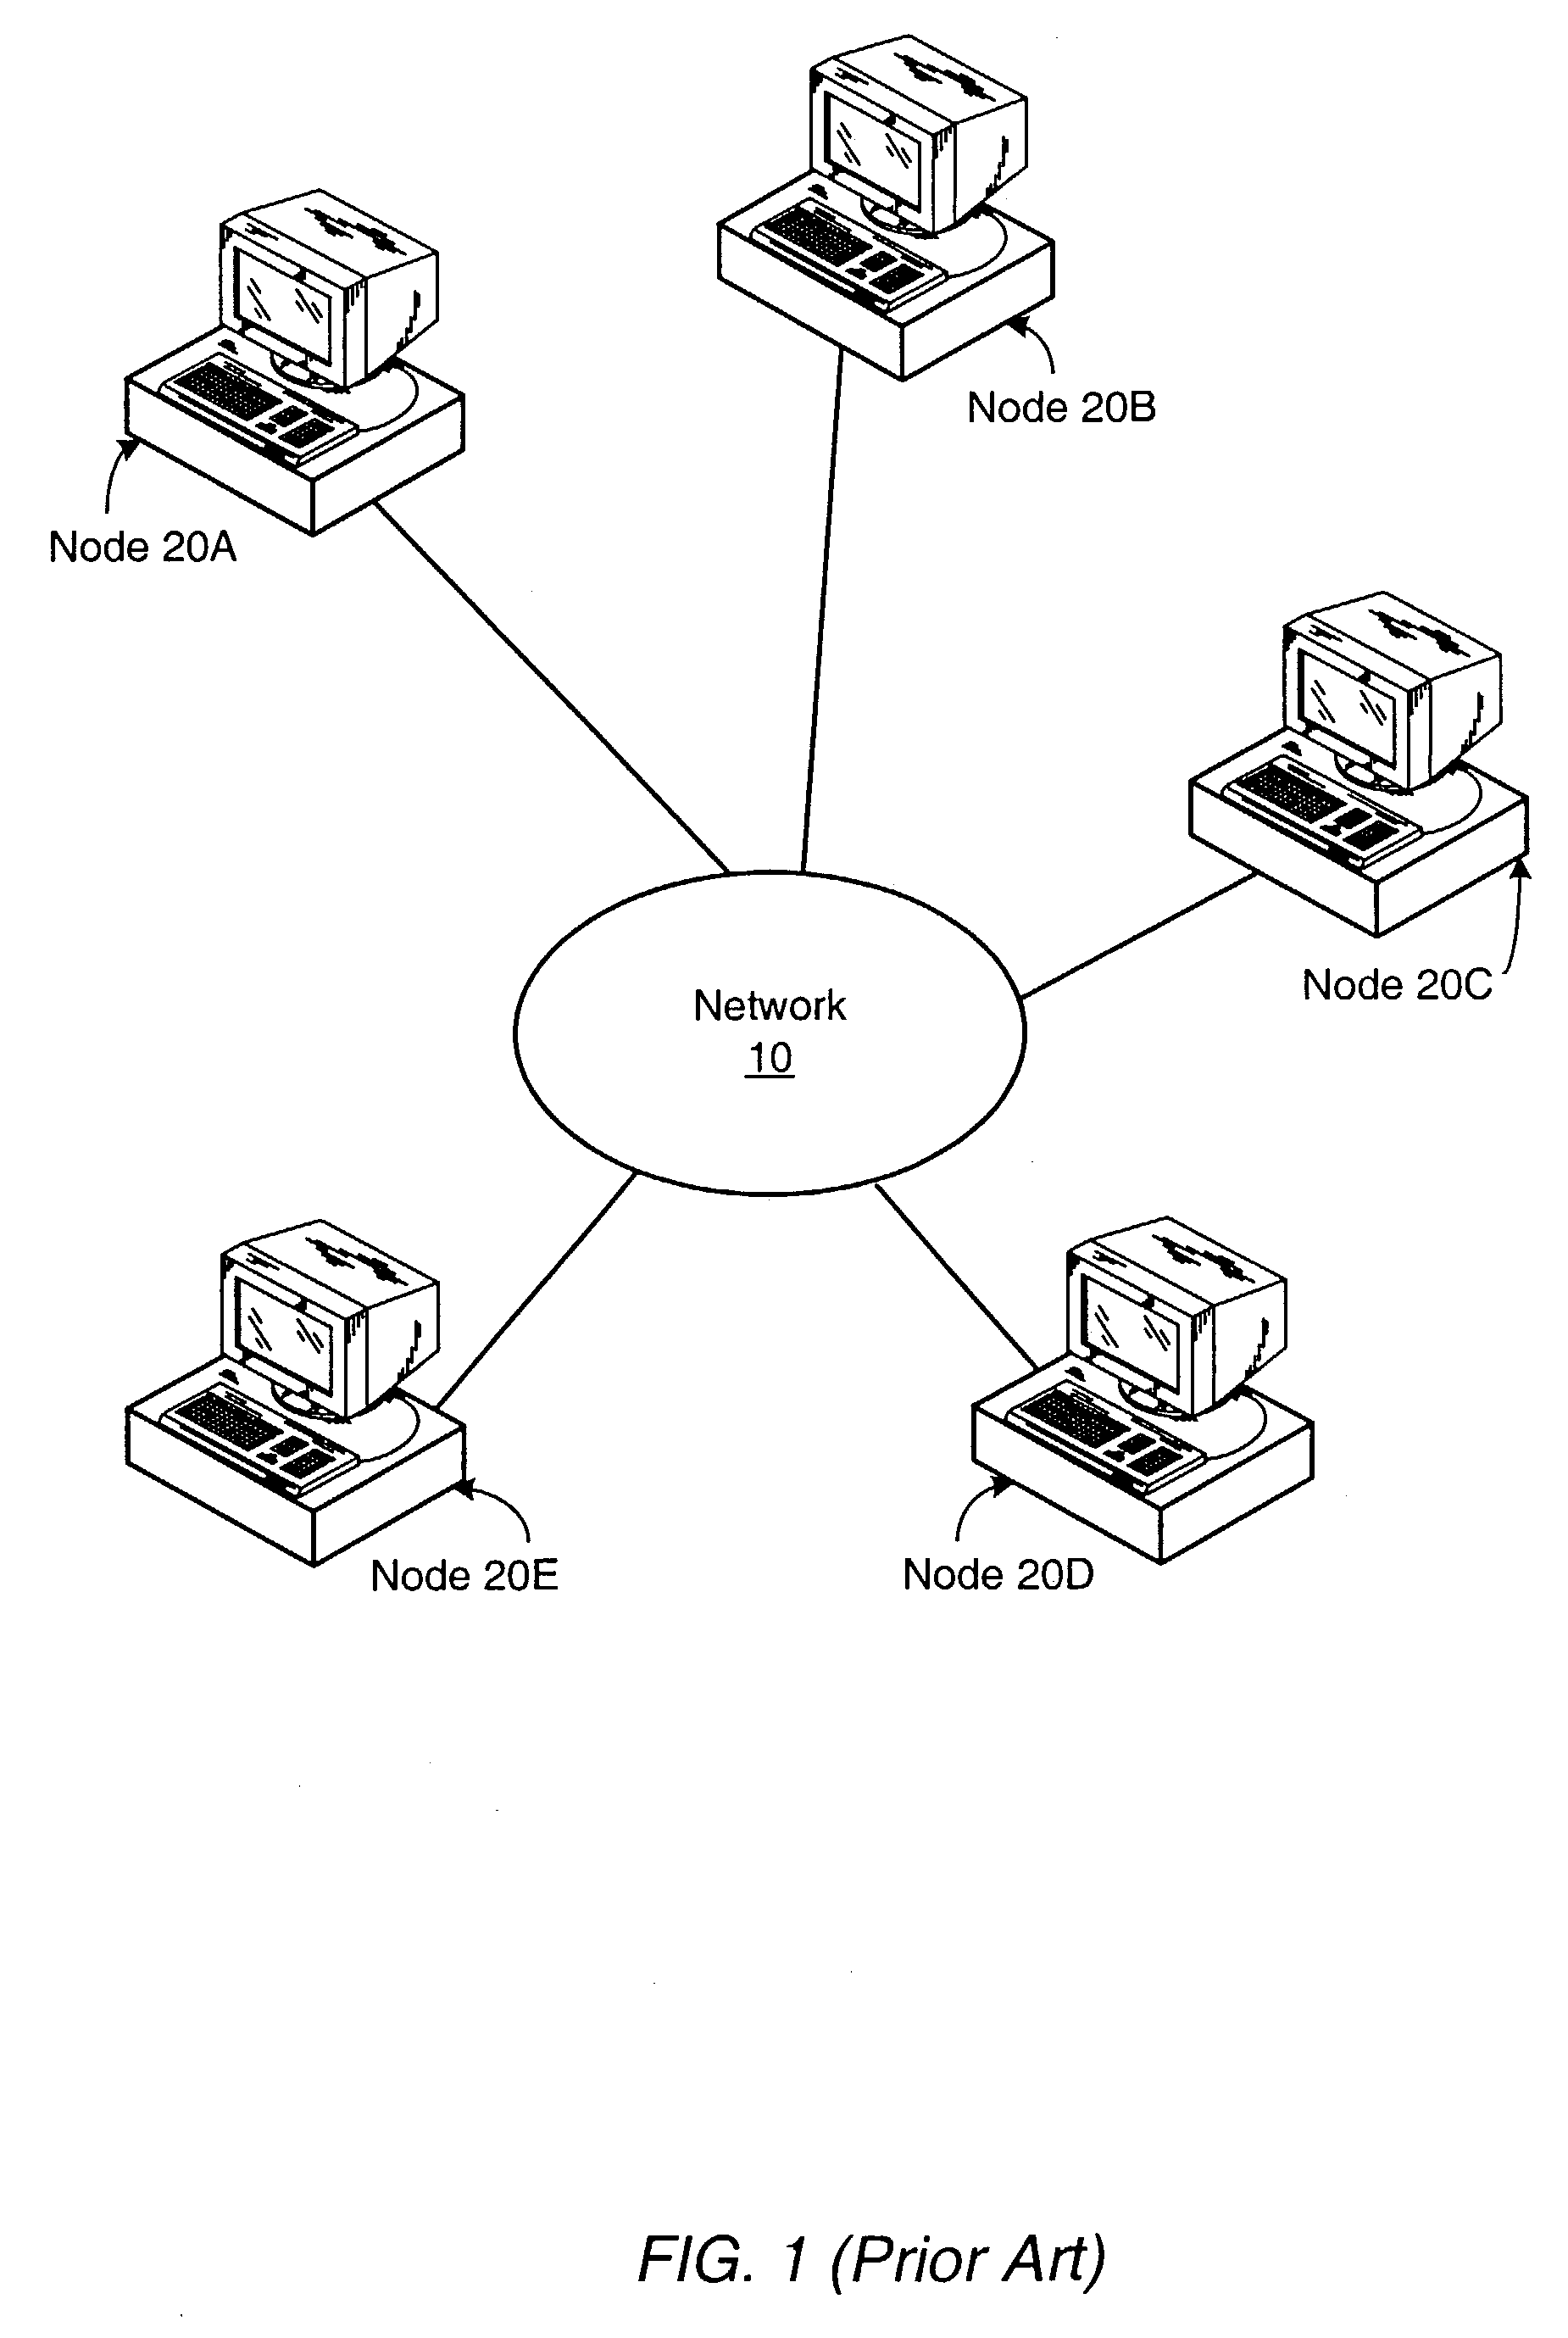 Method and system for creating a peer-to-peer overlay network